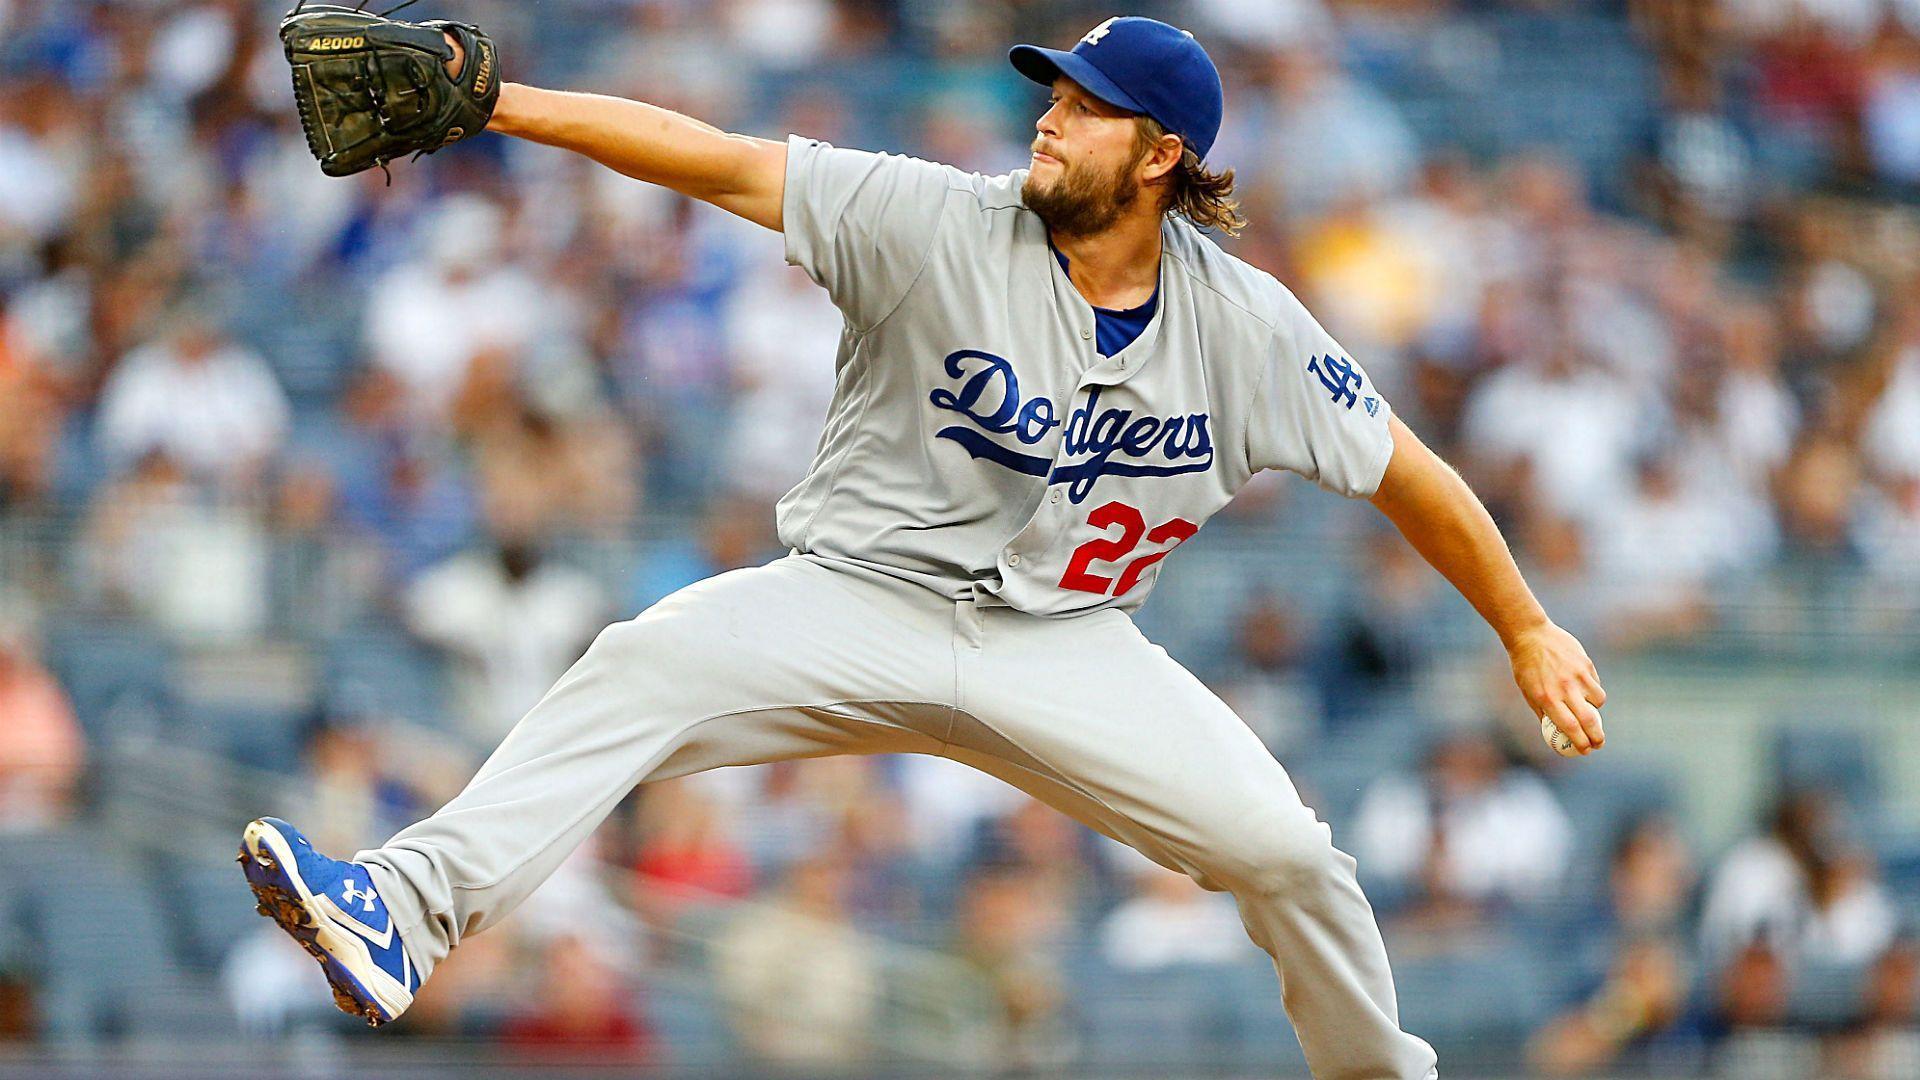 Clayton Kershaw gives up a hit, so his start was just 'OK, ' he